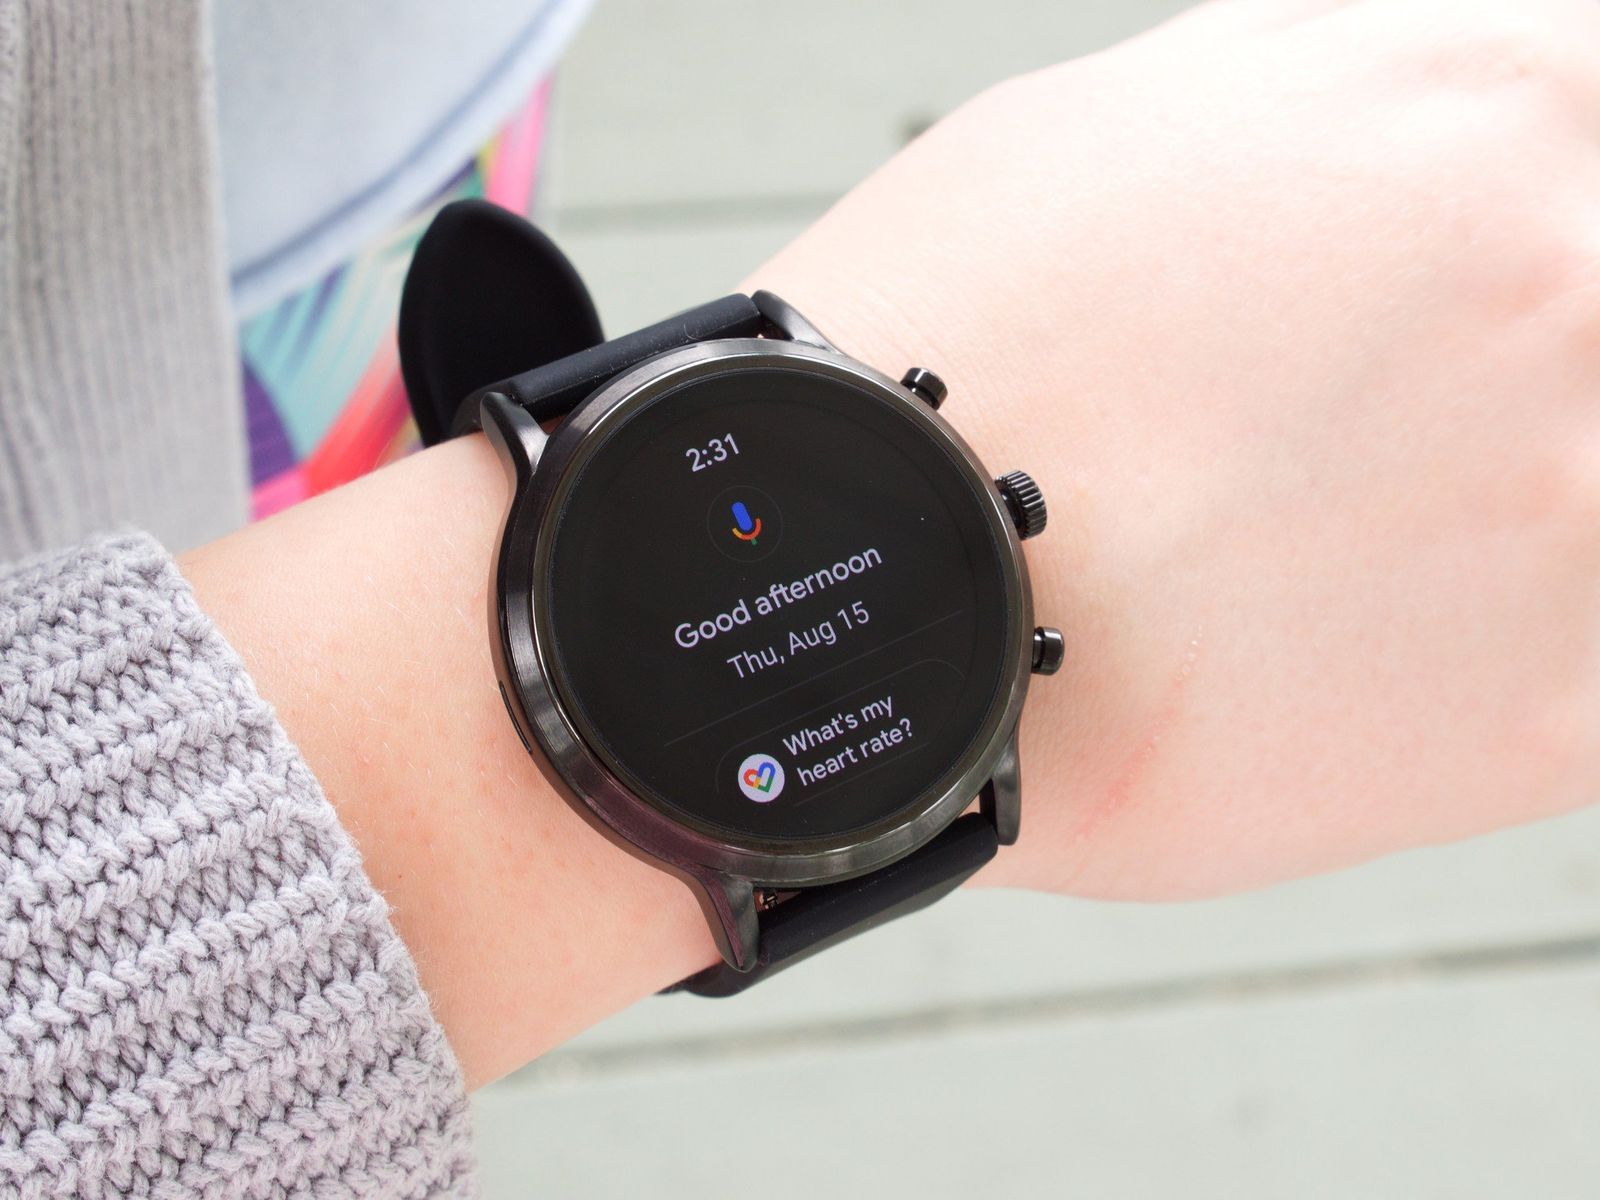 smartwatch that can answer calls